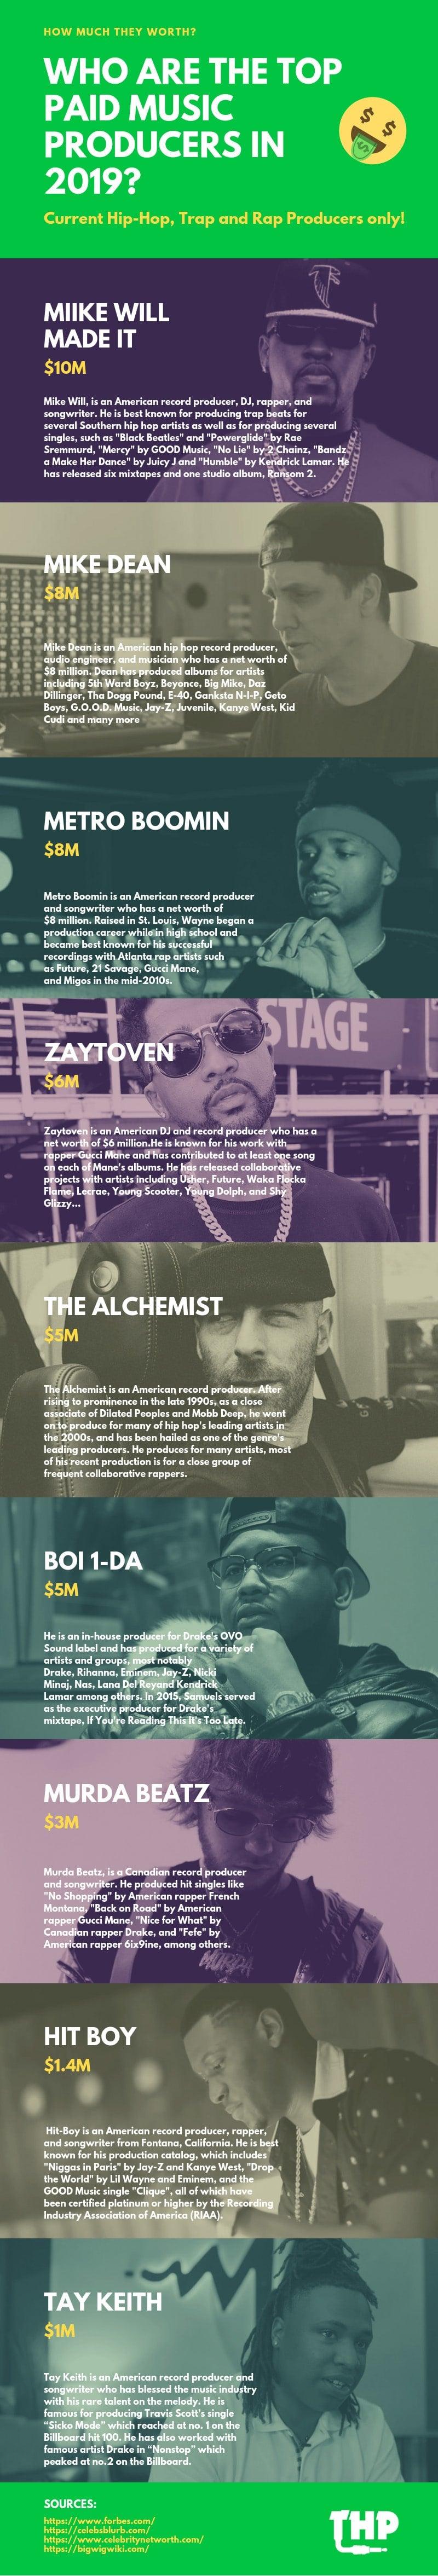 The 9 Highest Paid Producers in the Hip-Hop Industry